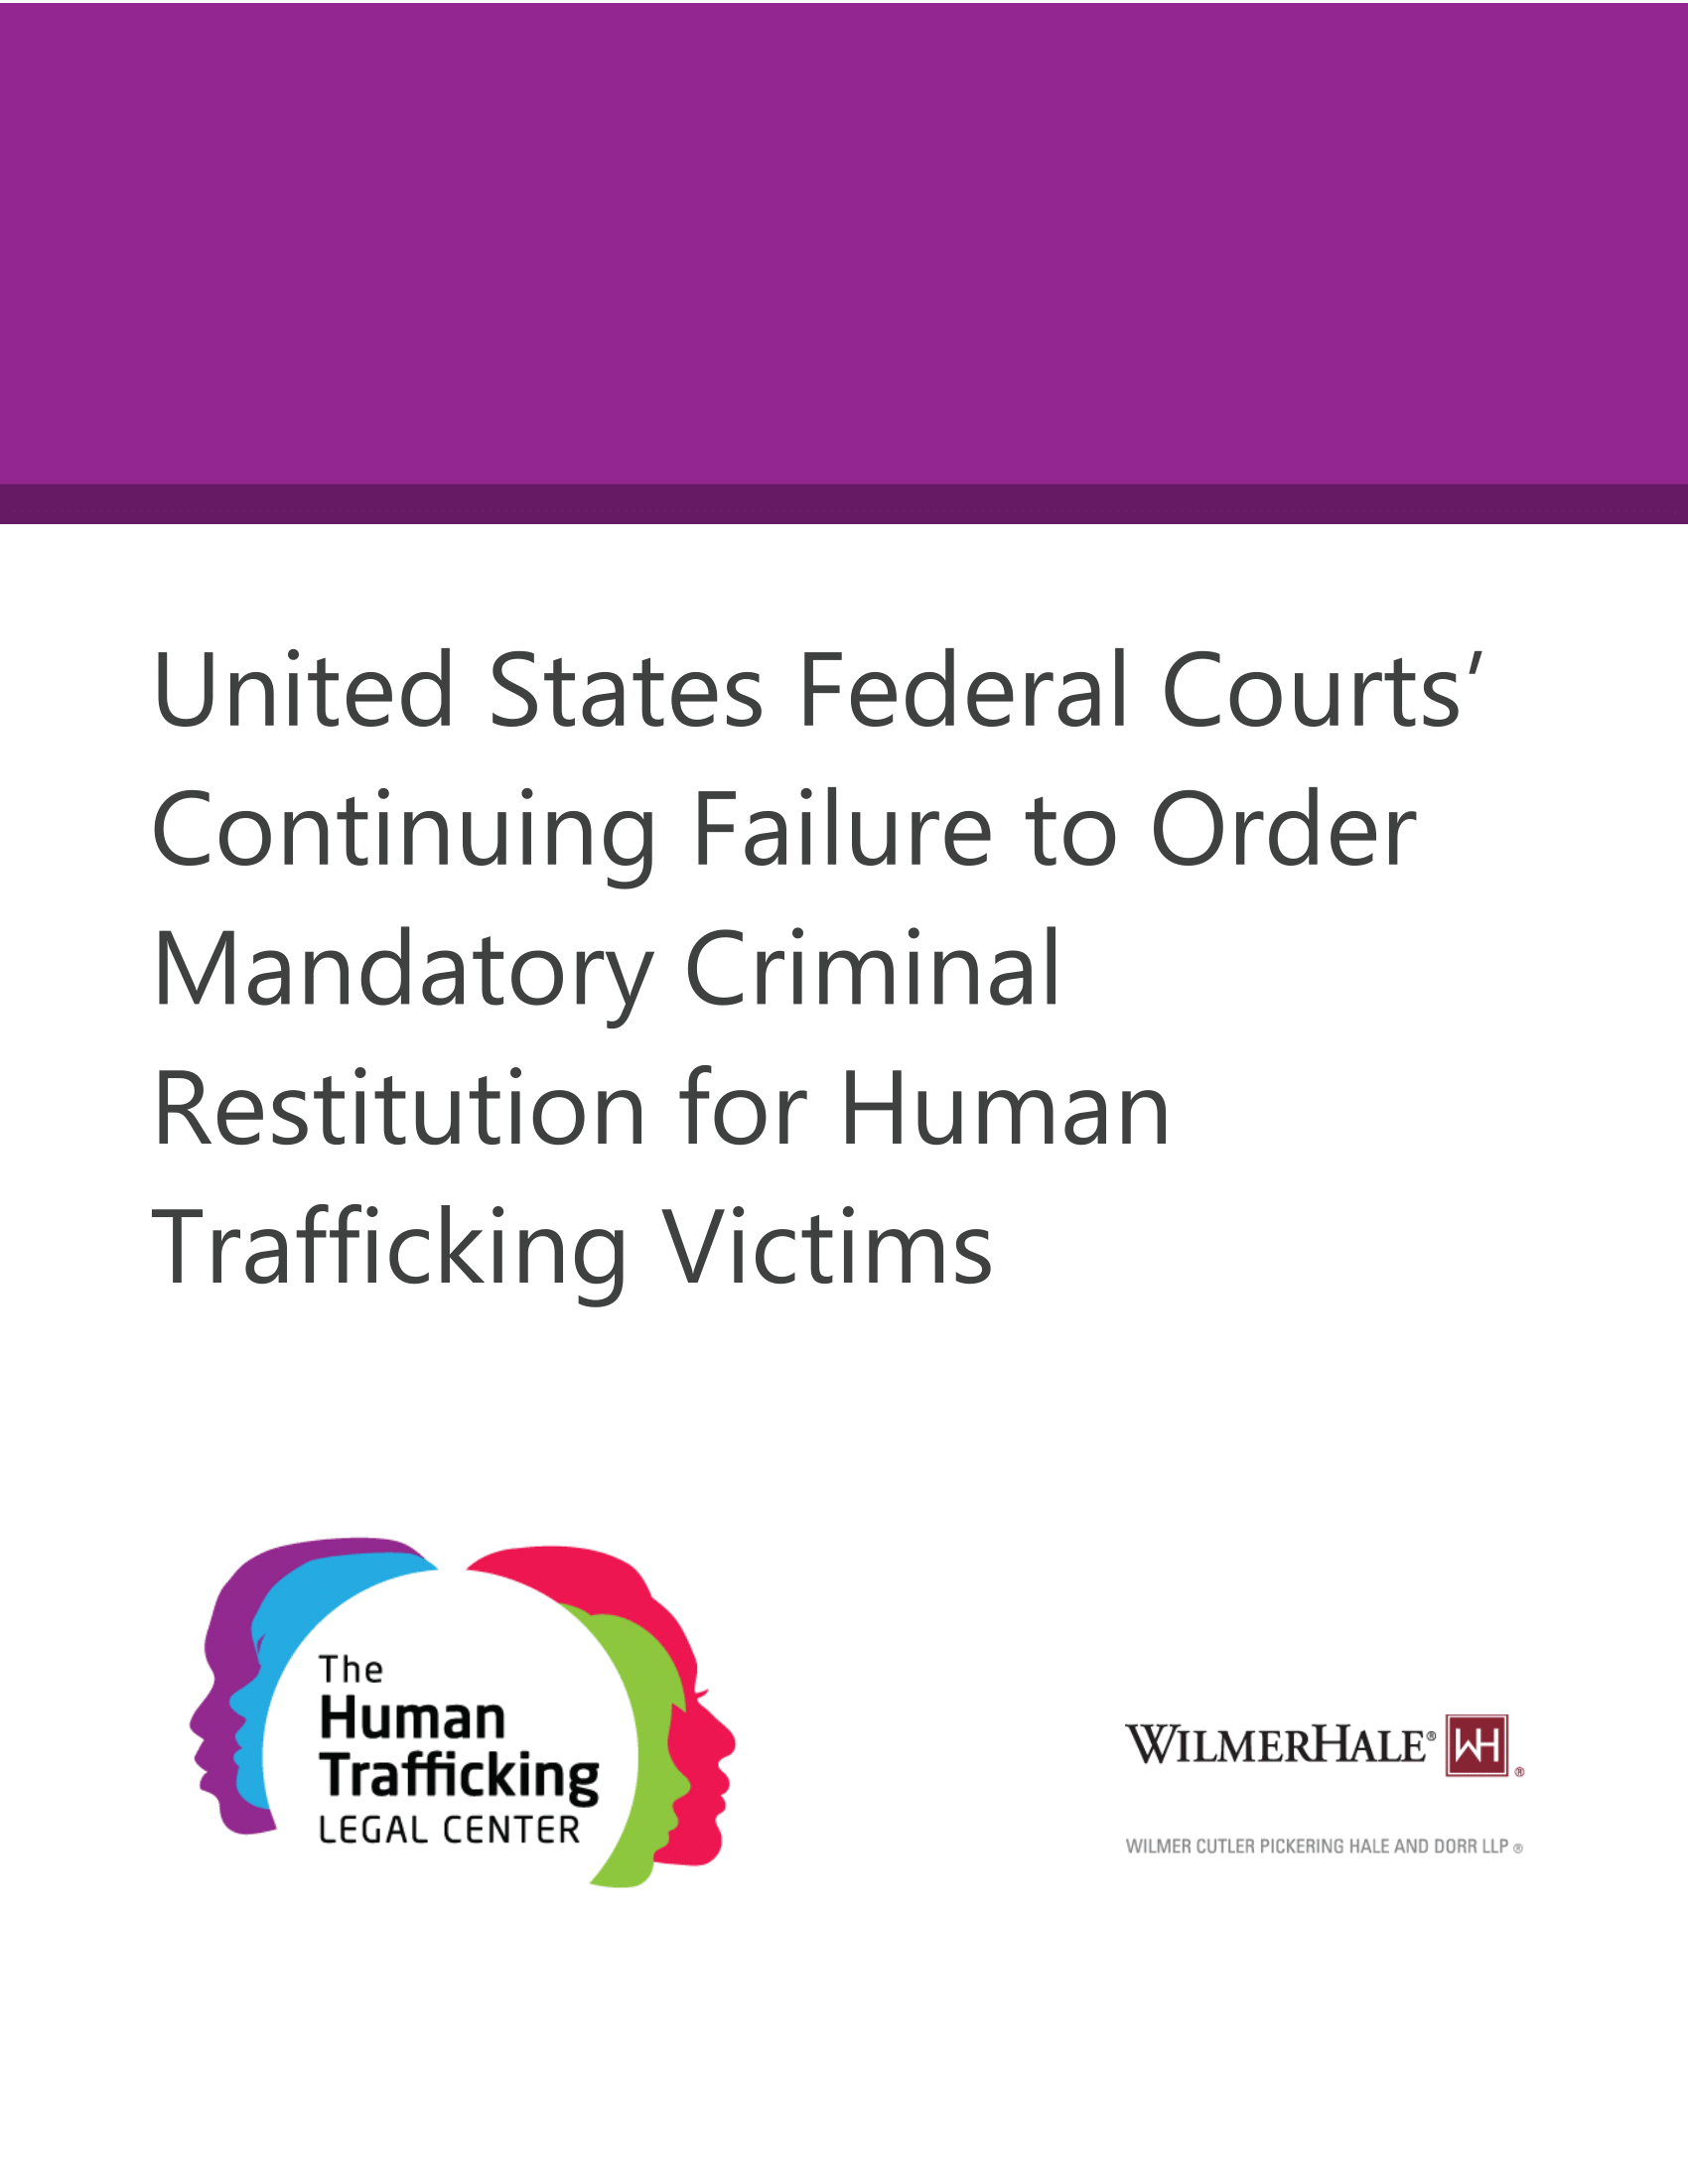 United States Federal Courts’ Continuing Failure to Order Mandatory Criminal Restitution for Human Trafficking Victims